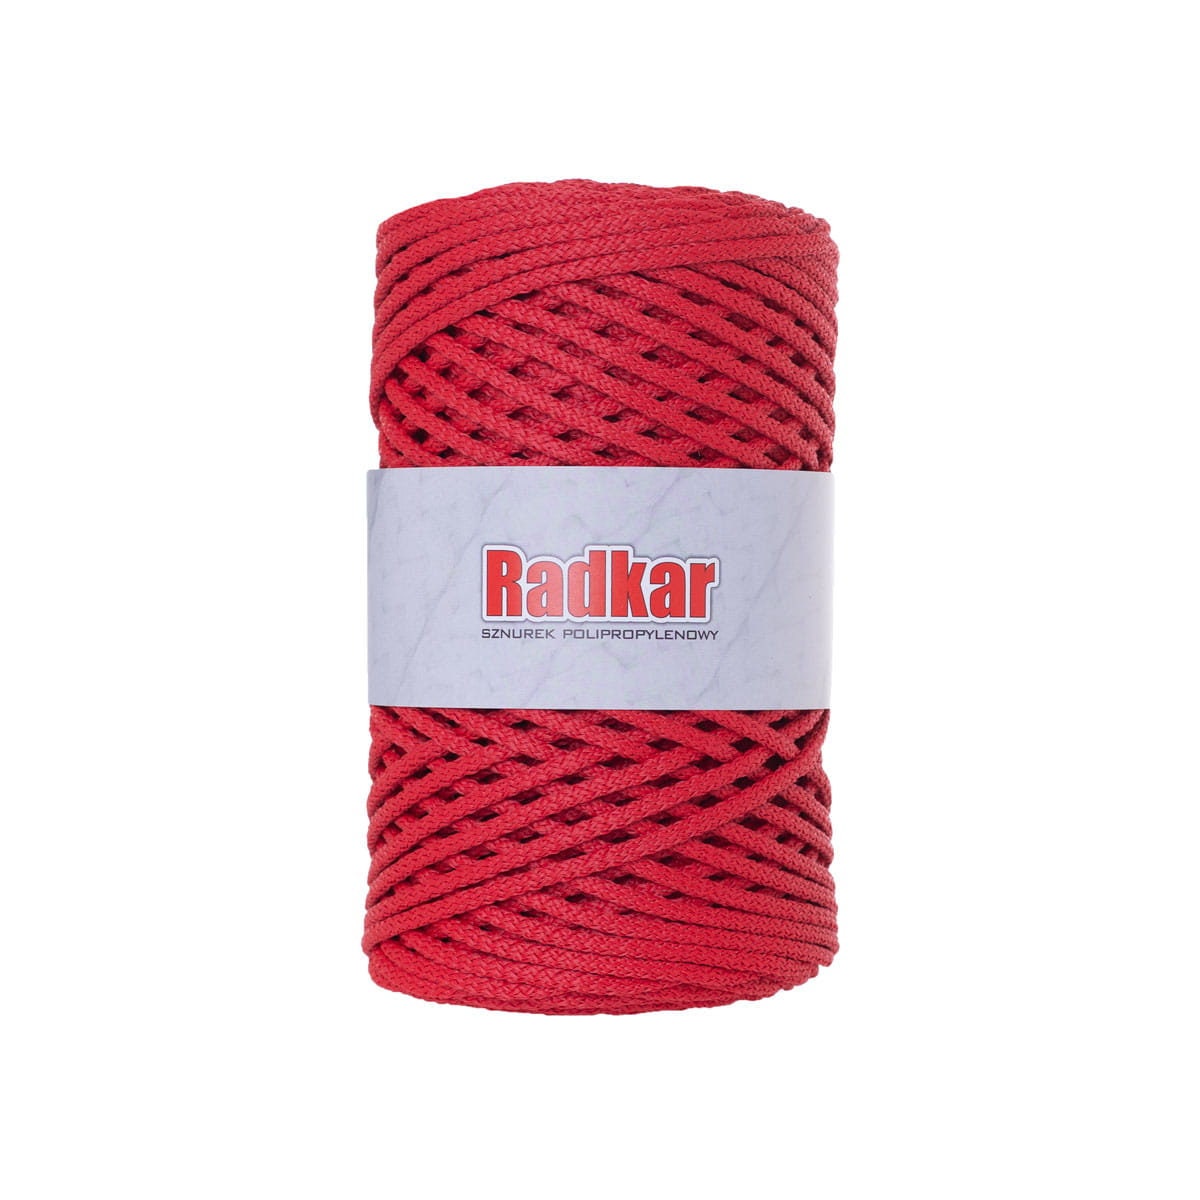 6mm Red Braided Macrame Cord 100 Yards